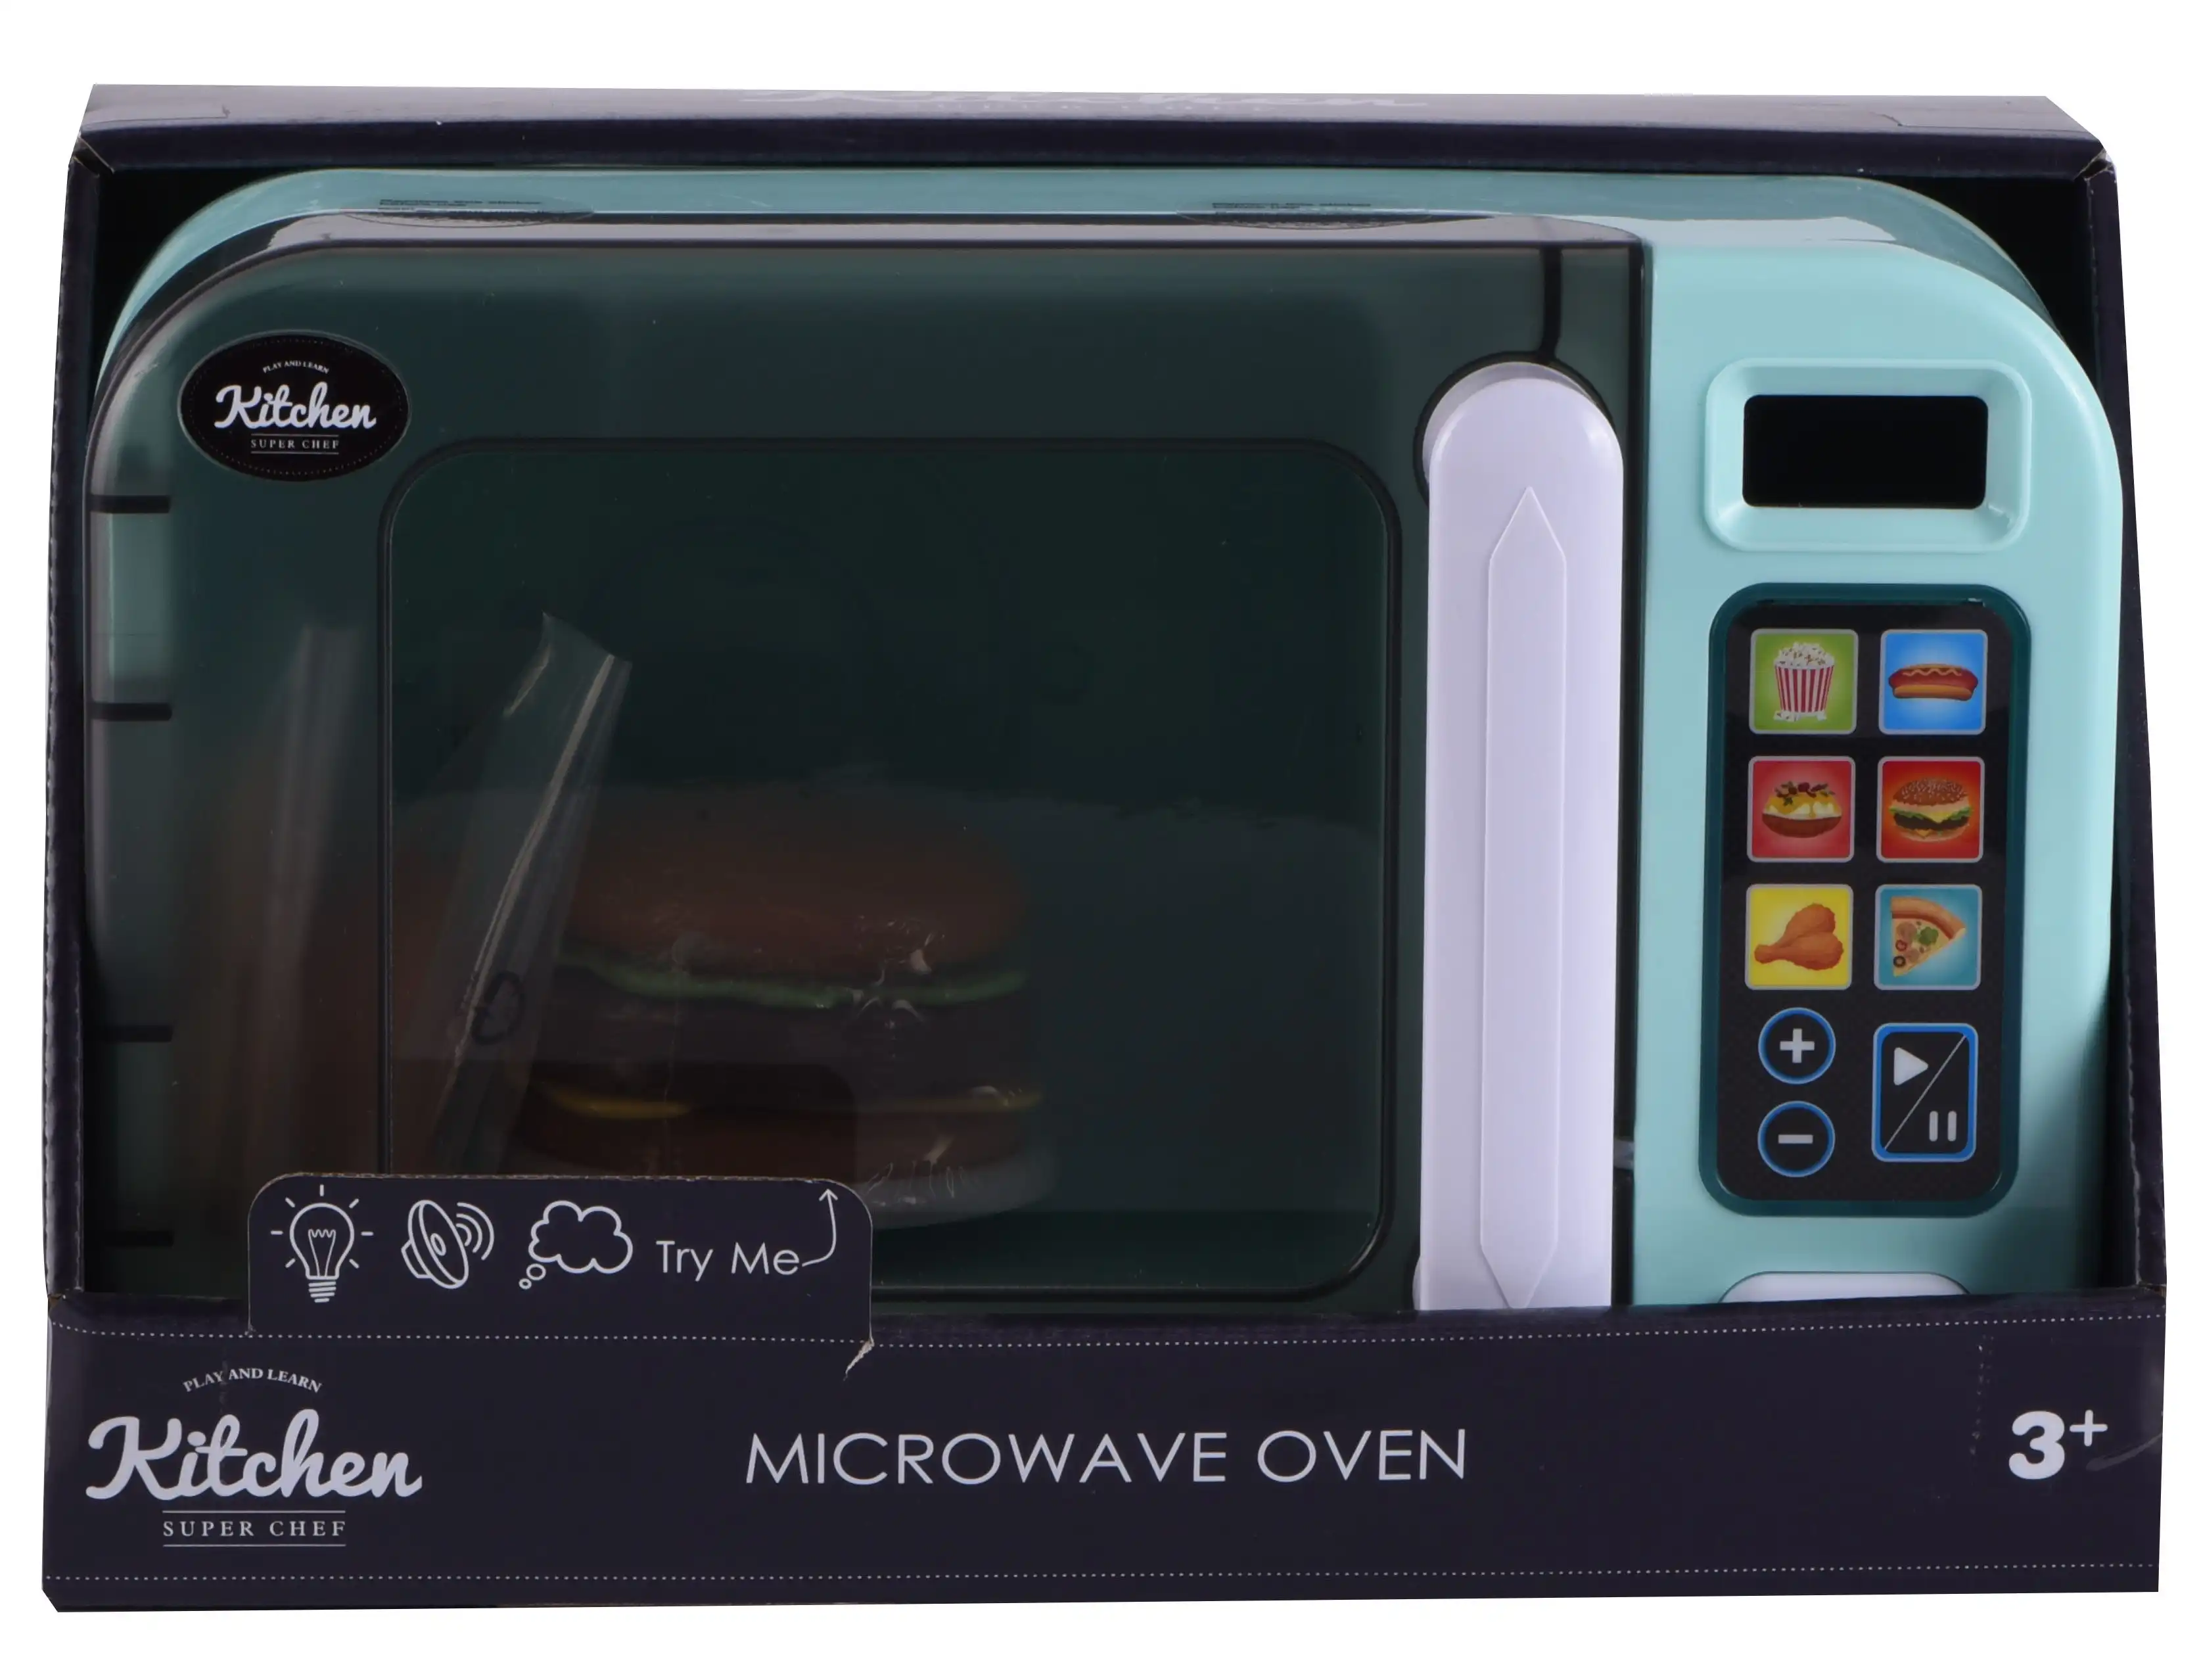 1st Microwave Oven